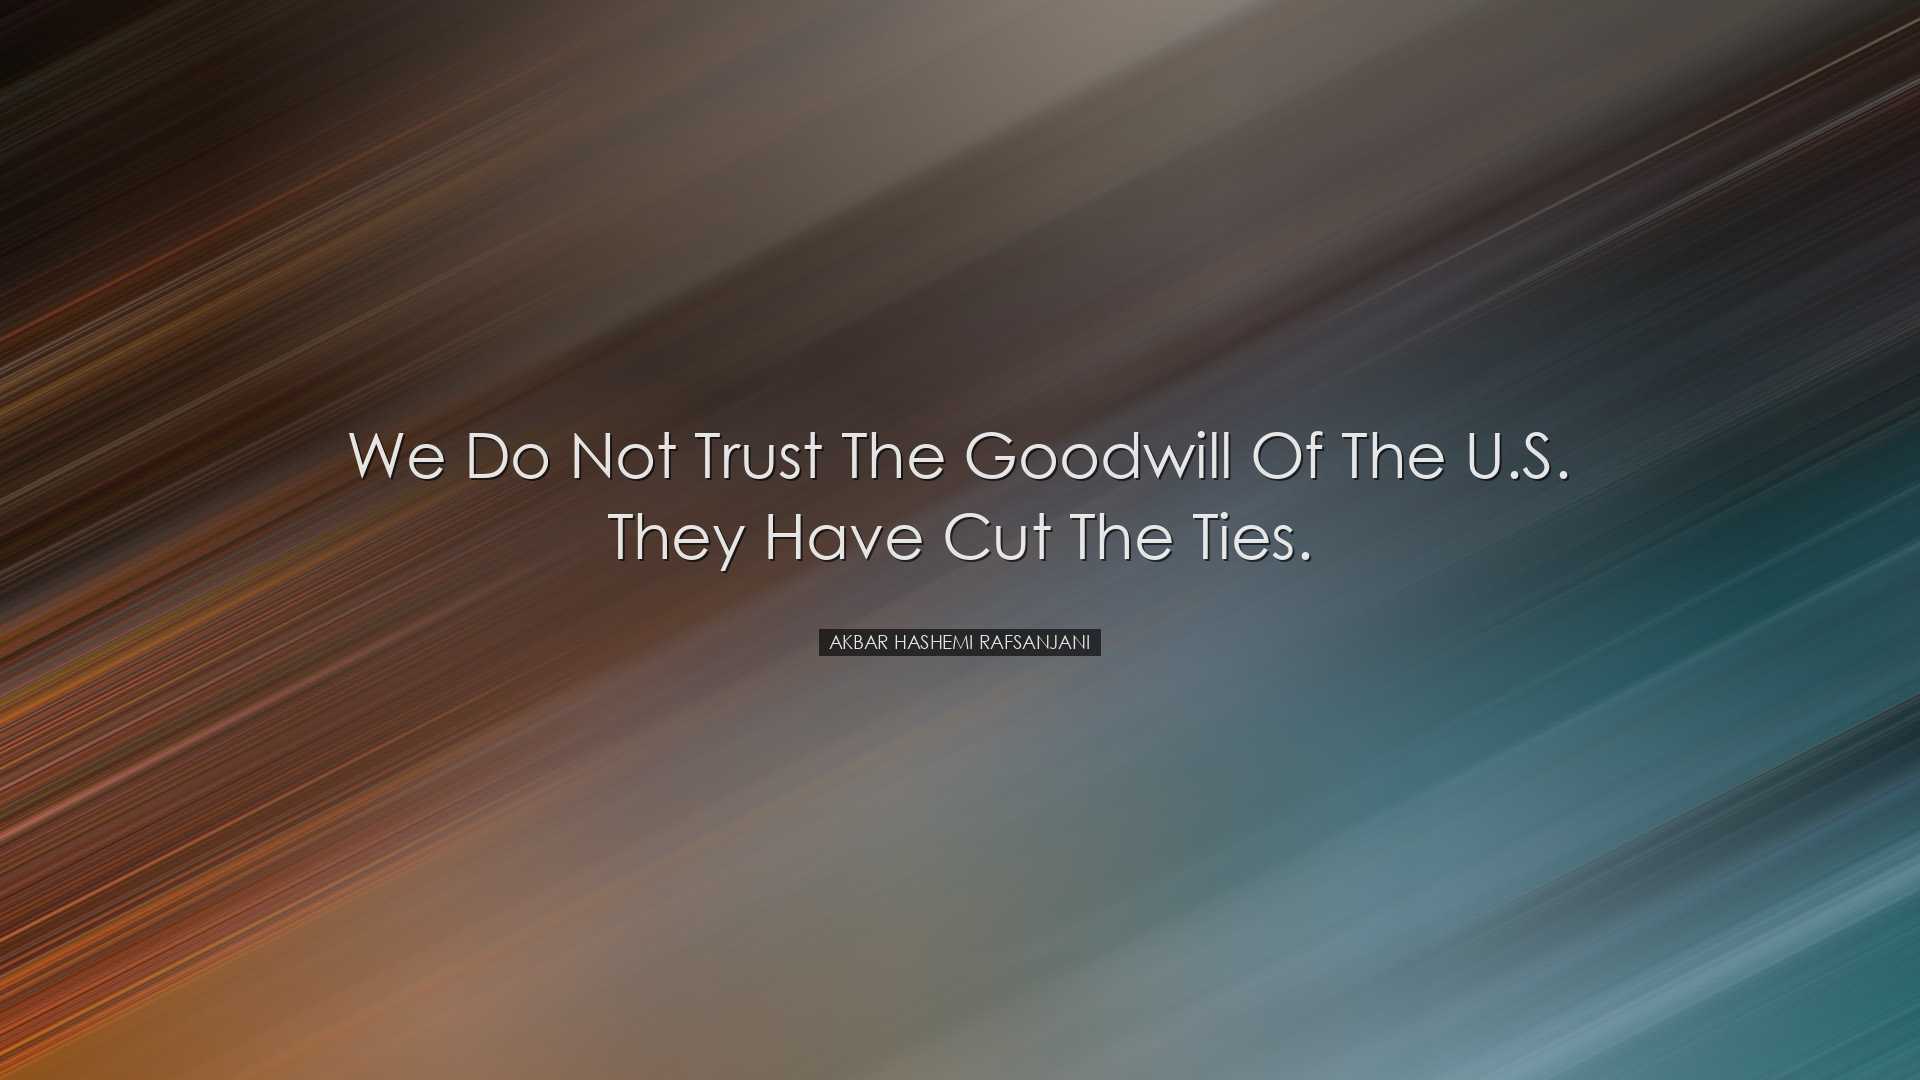 We do not trust the goodwill of the U.S. They have cut the ties. -